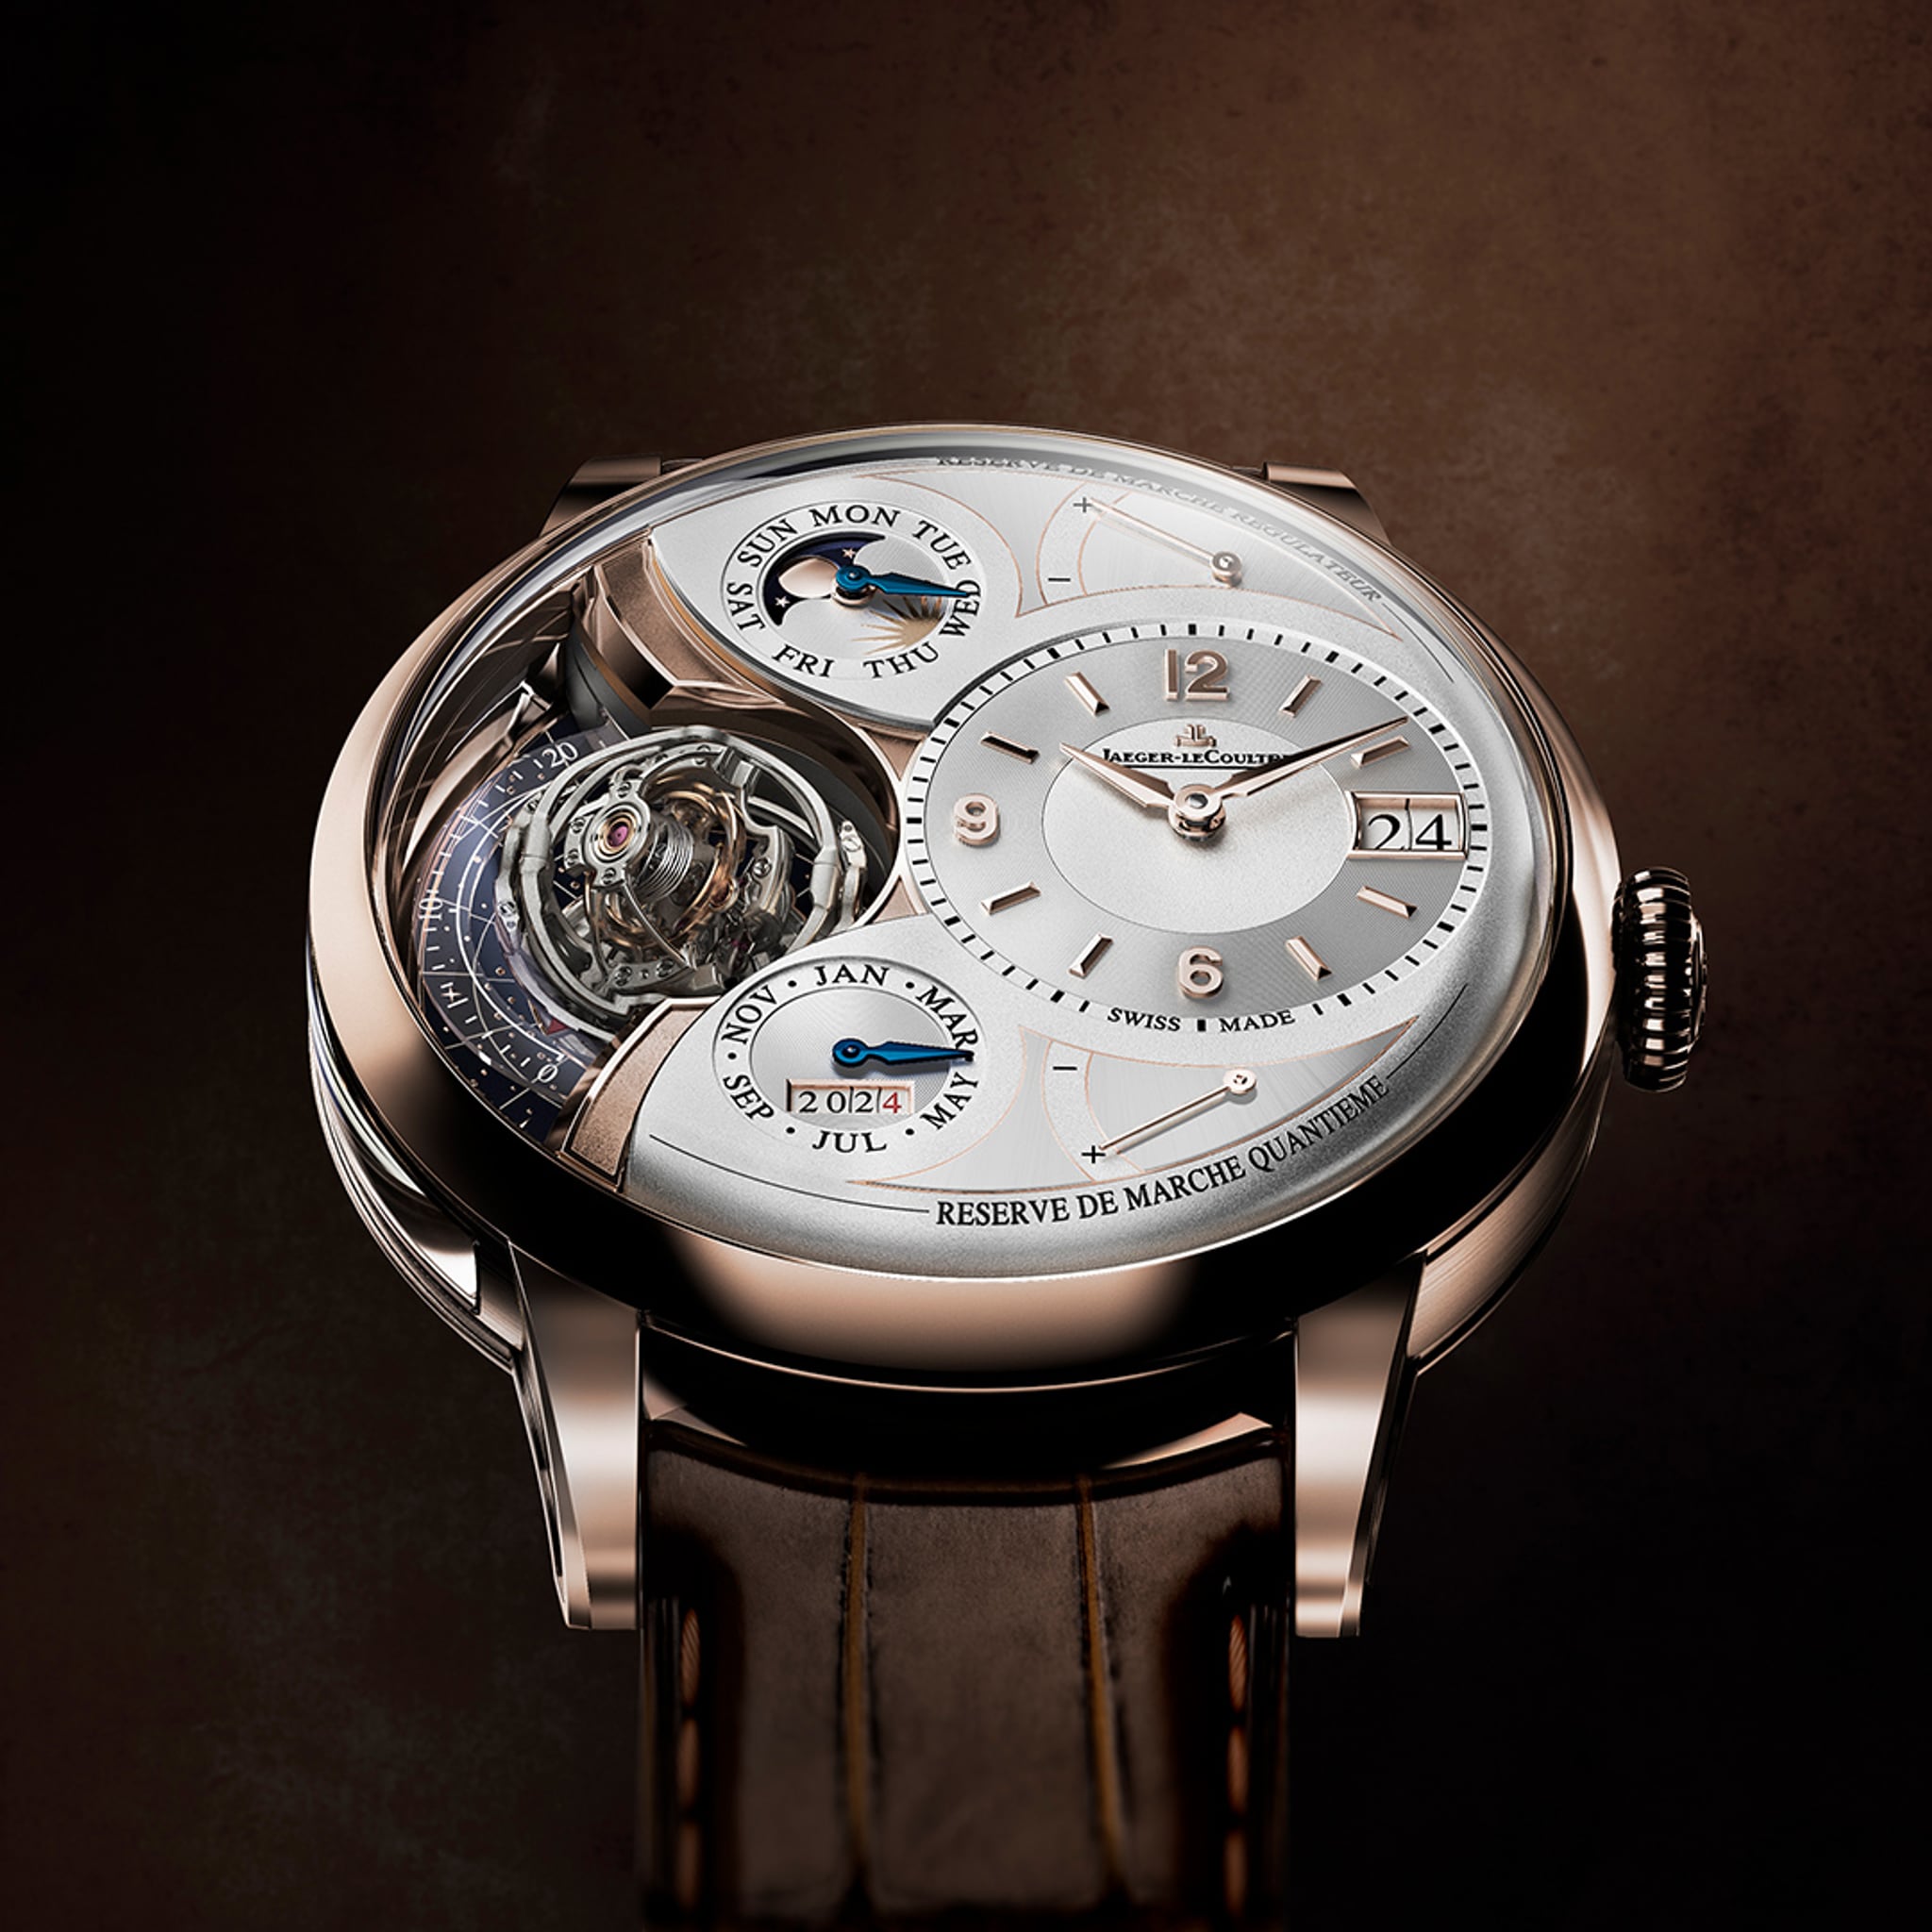 Jaeger-LeCoultre Perpetual Calender Watches and Wonders